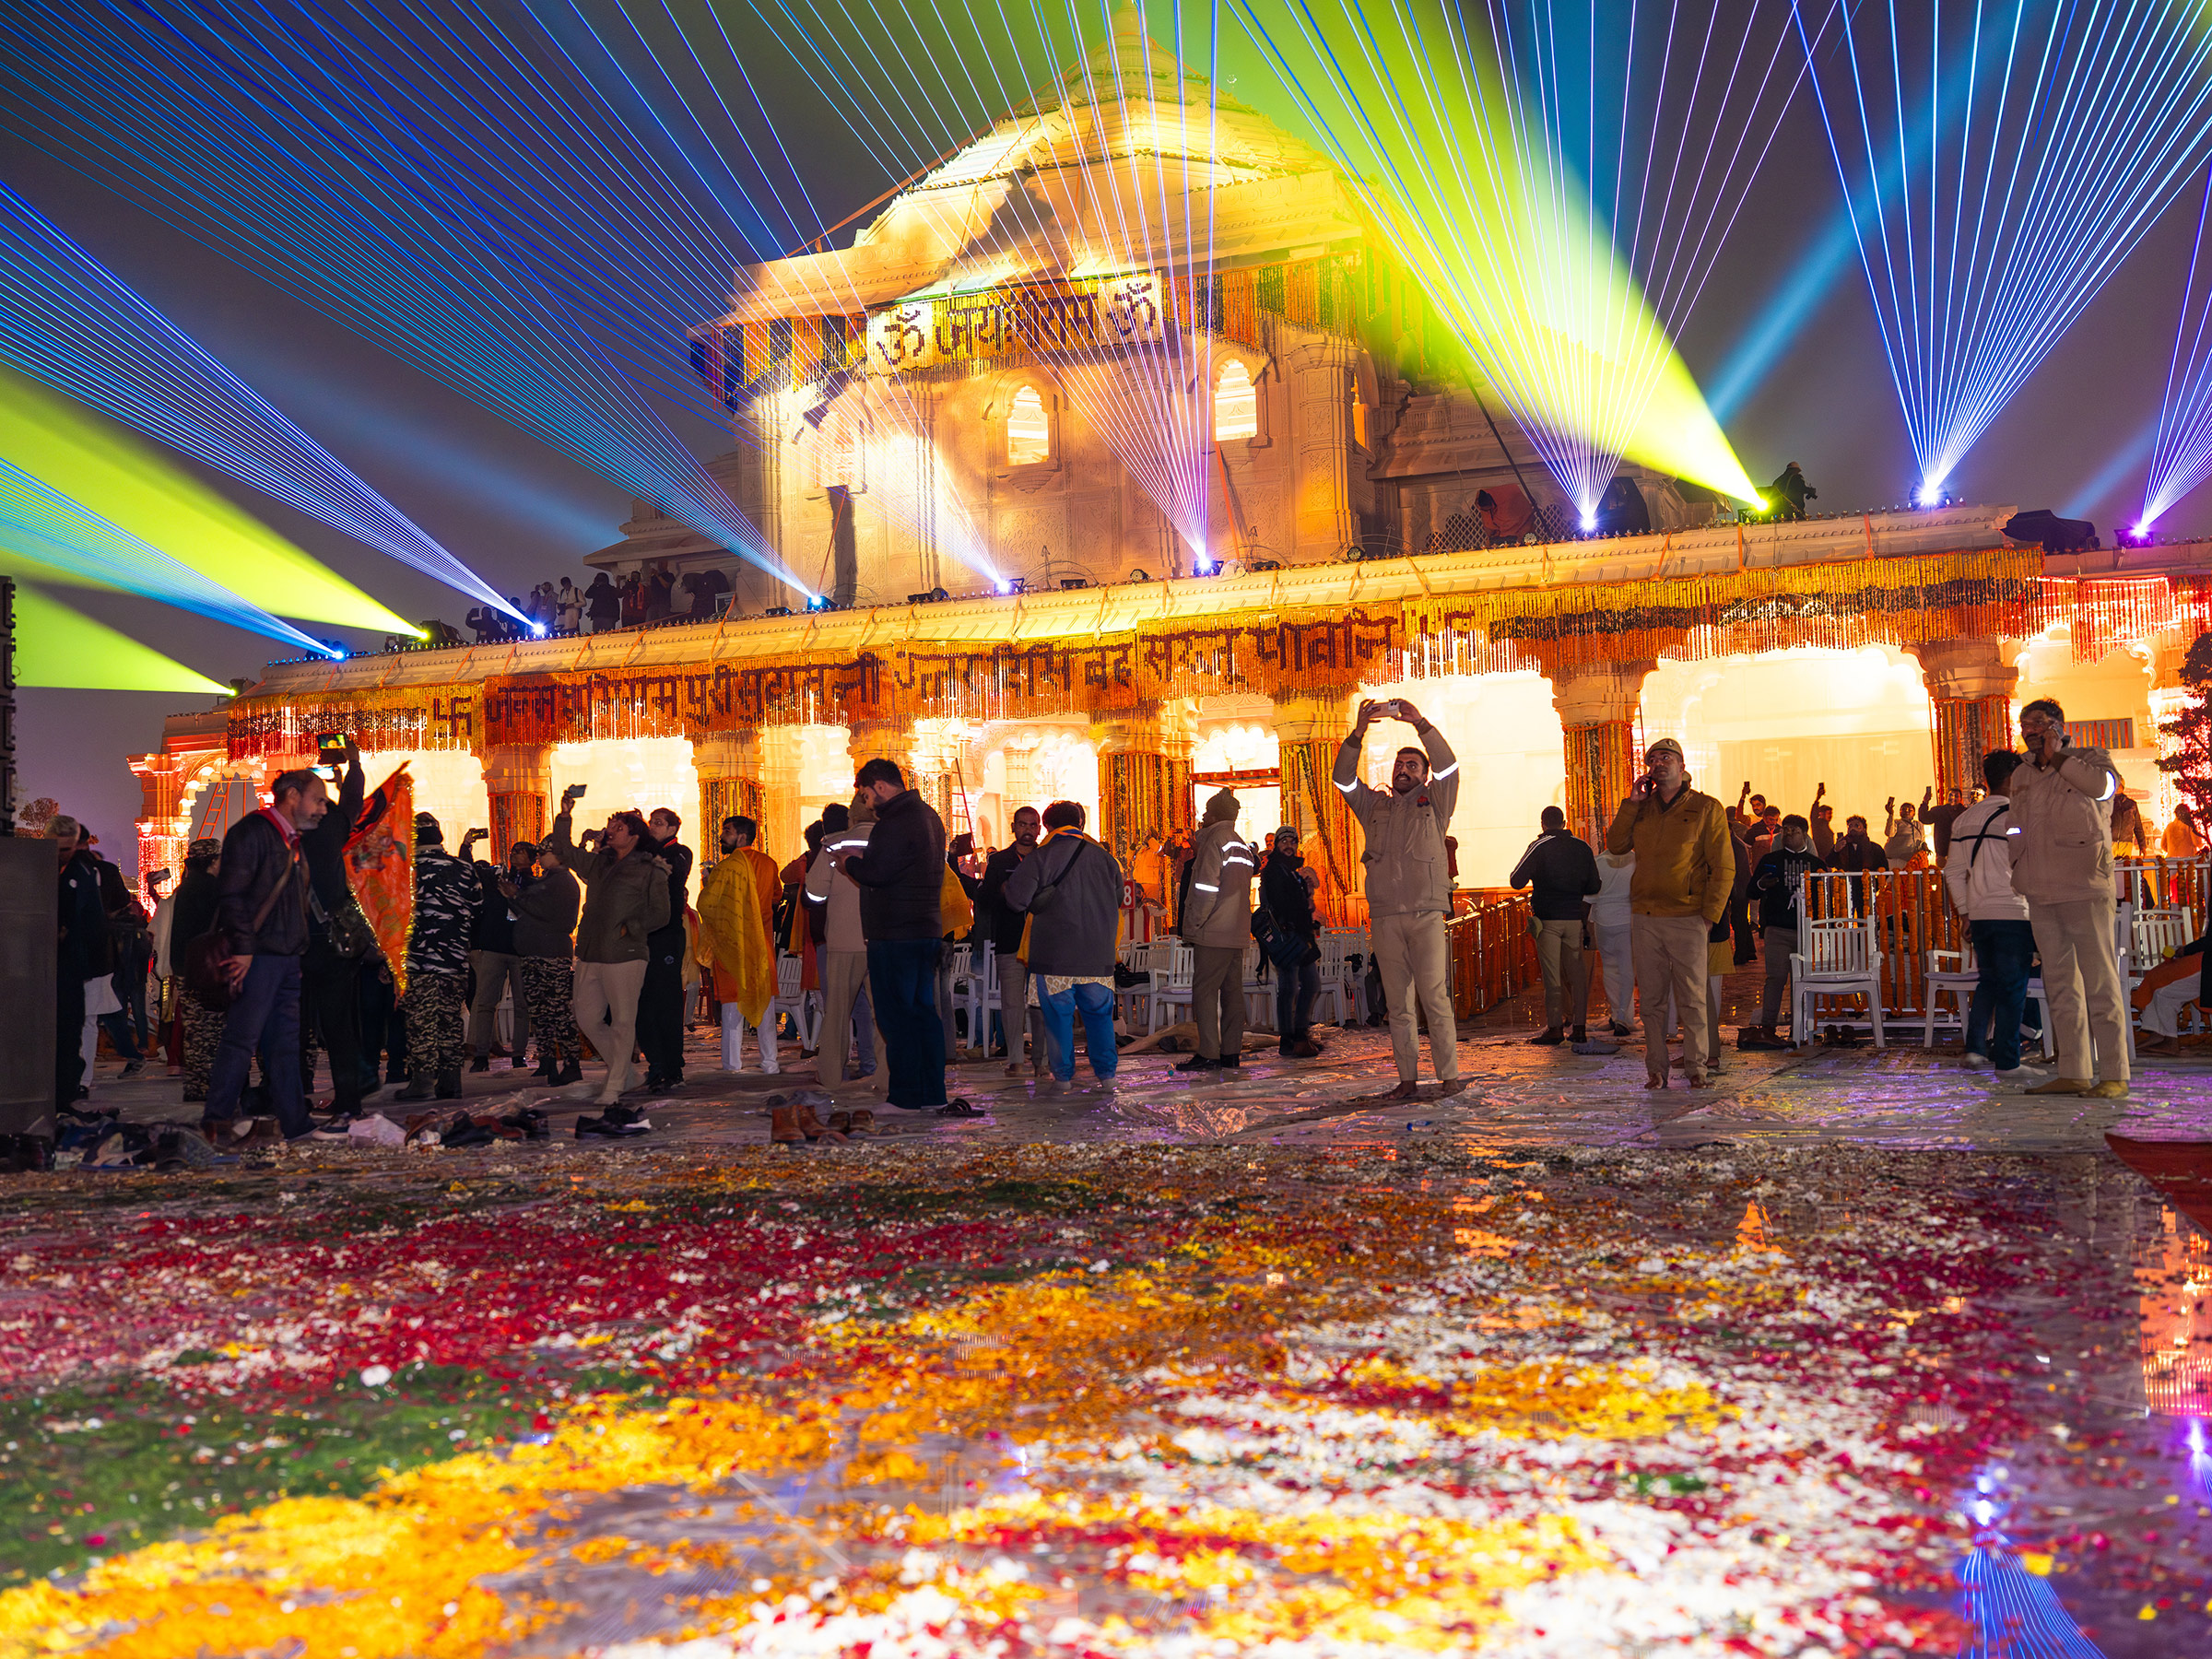 Visitors take photos of a laser light show at the newly consecrated Ram temple in Ayodhya, India, on Jan. 22.